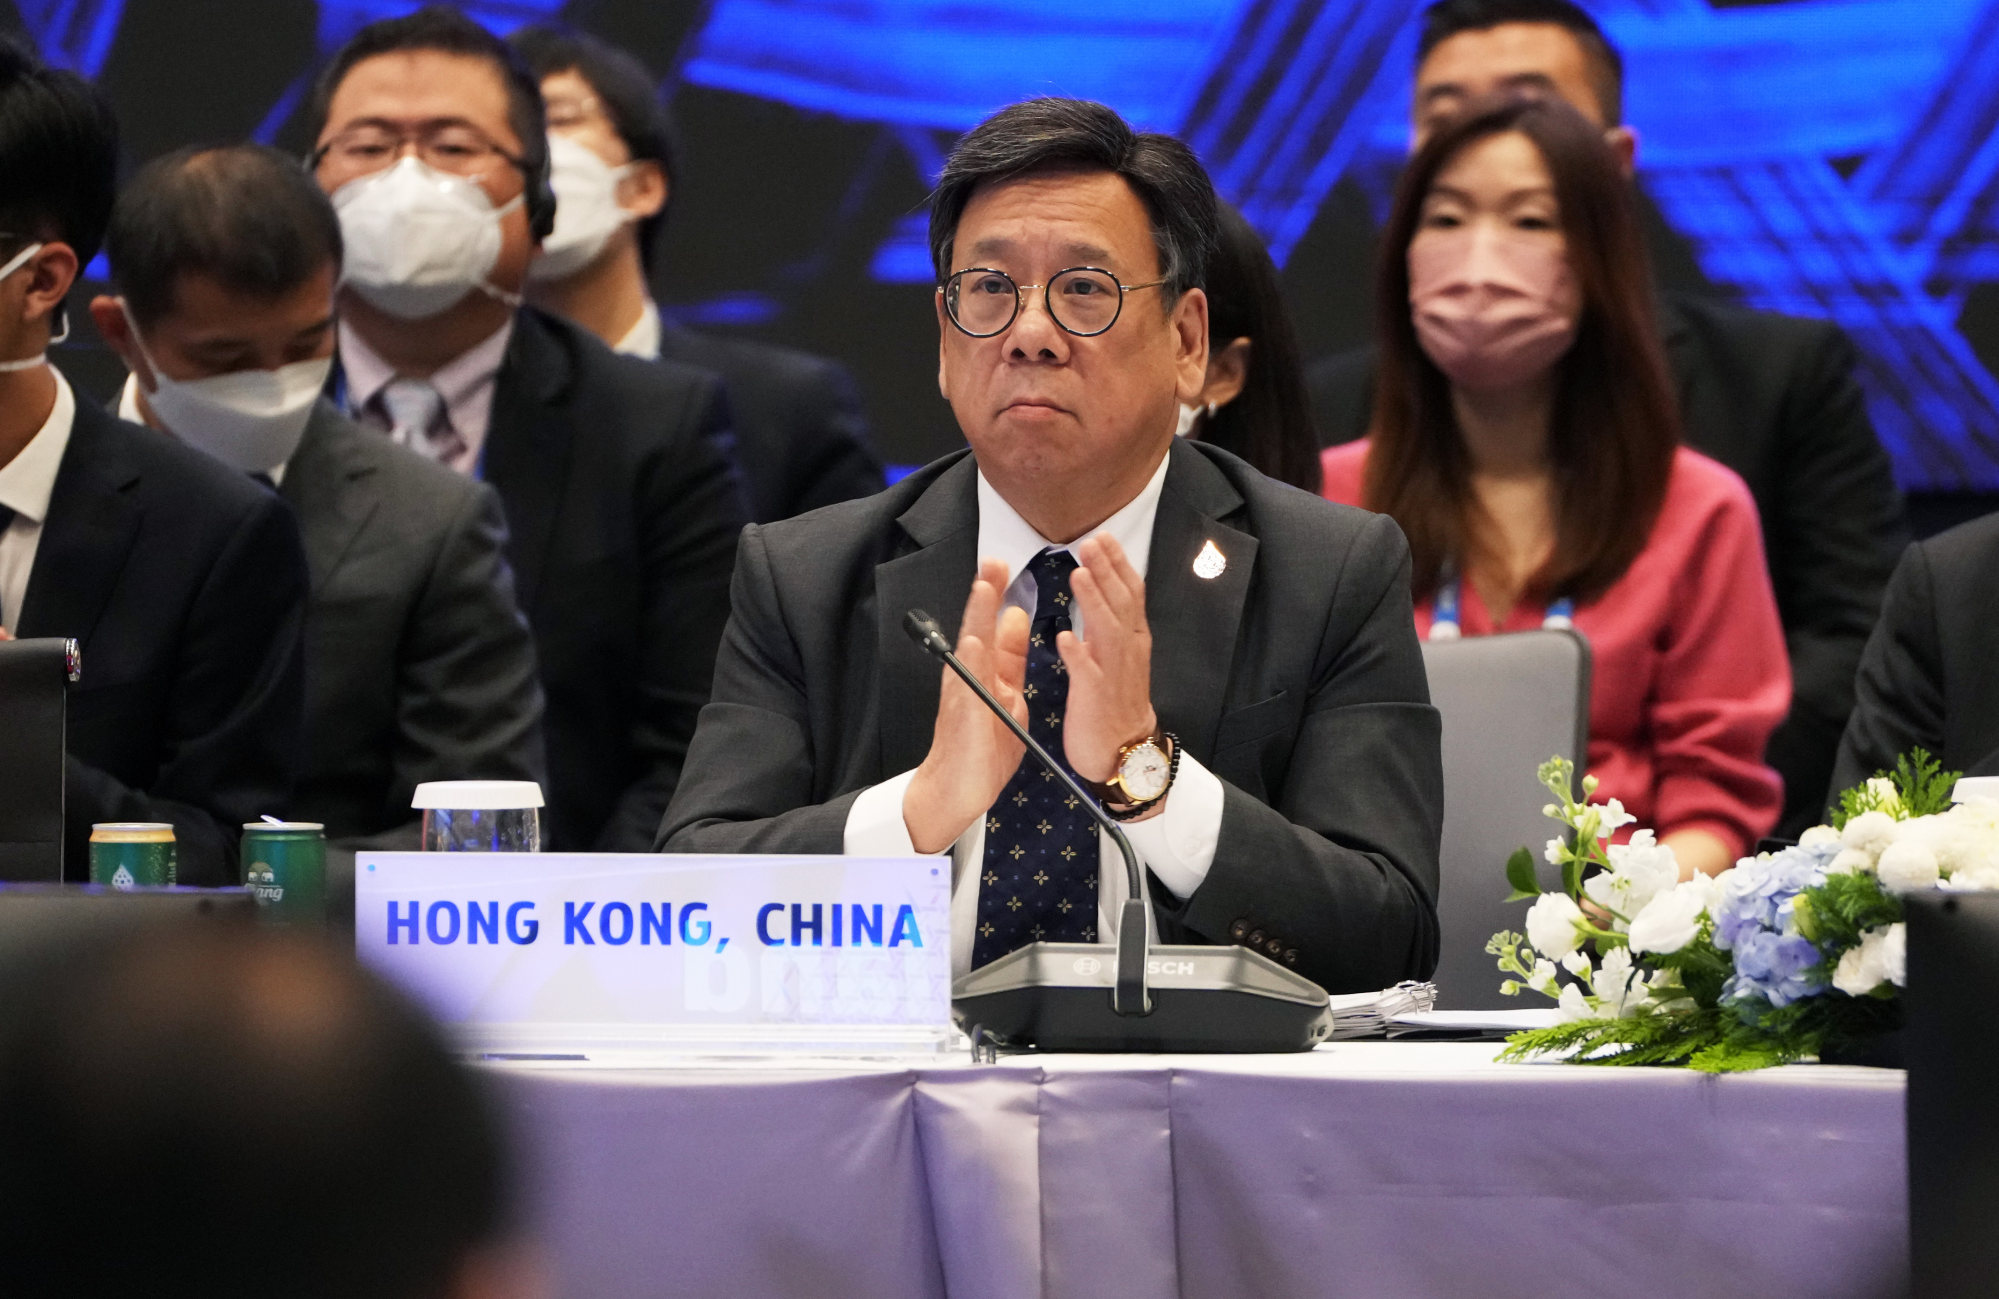 Hong Kong Secretary for Commerce and Economic Development Algernon Yau, shown at the Apec conference in Bangkok last month, hailed the WTO ruling. Photo: Sam Tsang